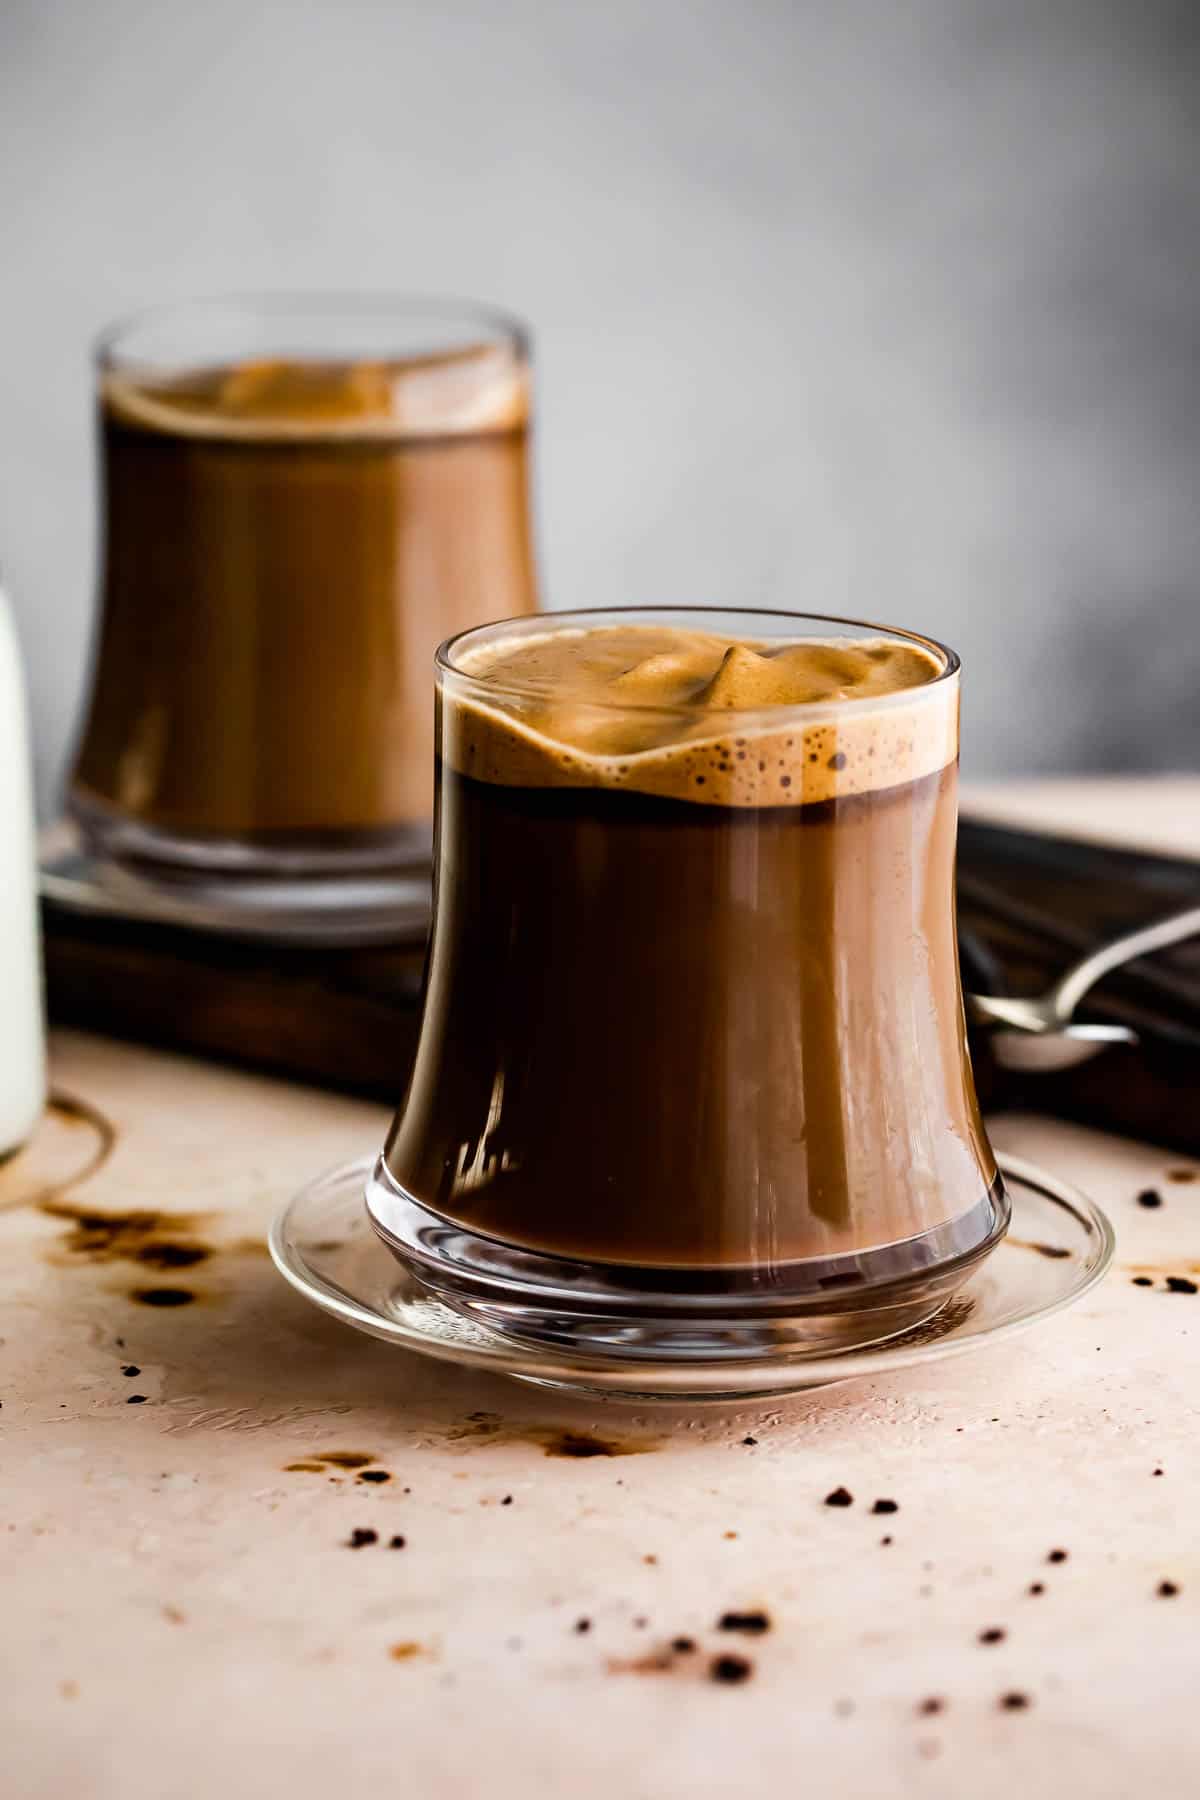 Image of two glass coffee mugs filled with coffee.